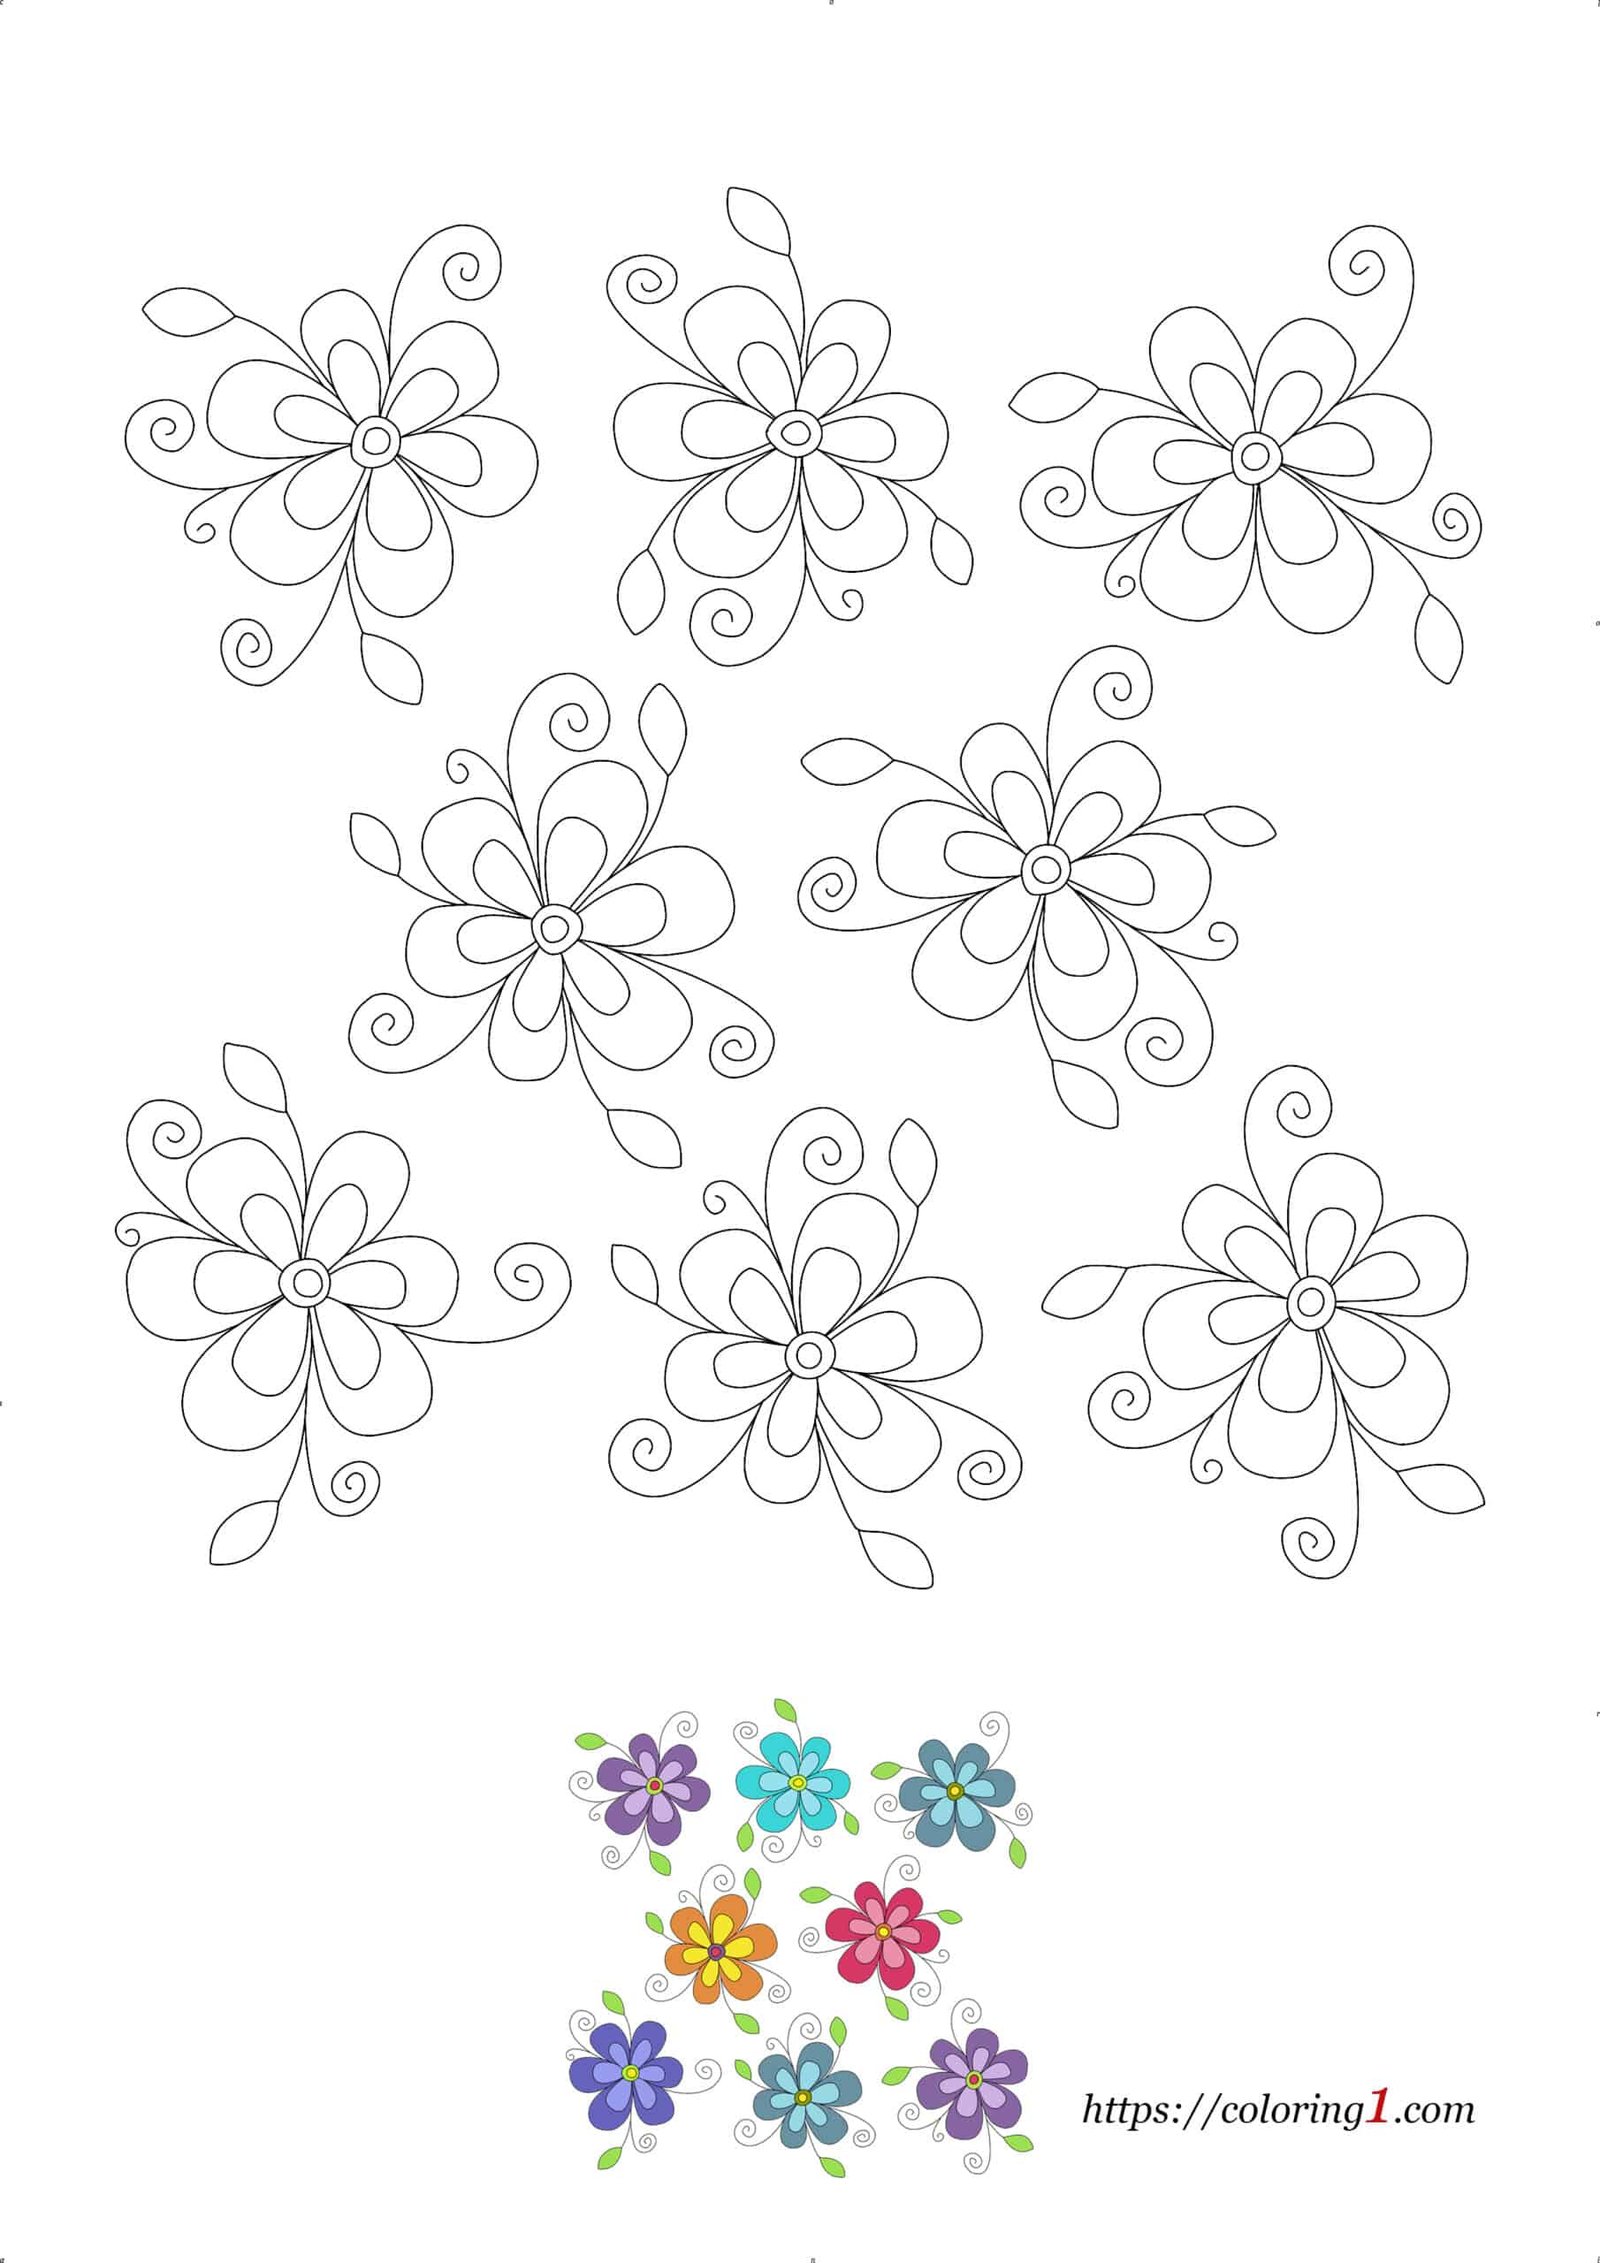 Detailed Flower Pattern Design hard coloring page to print for adults